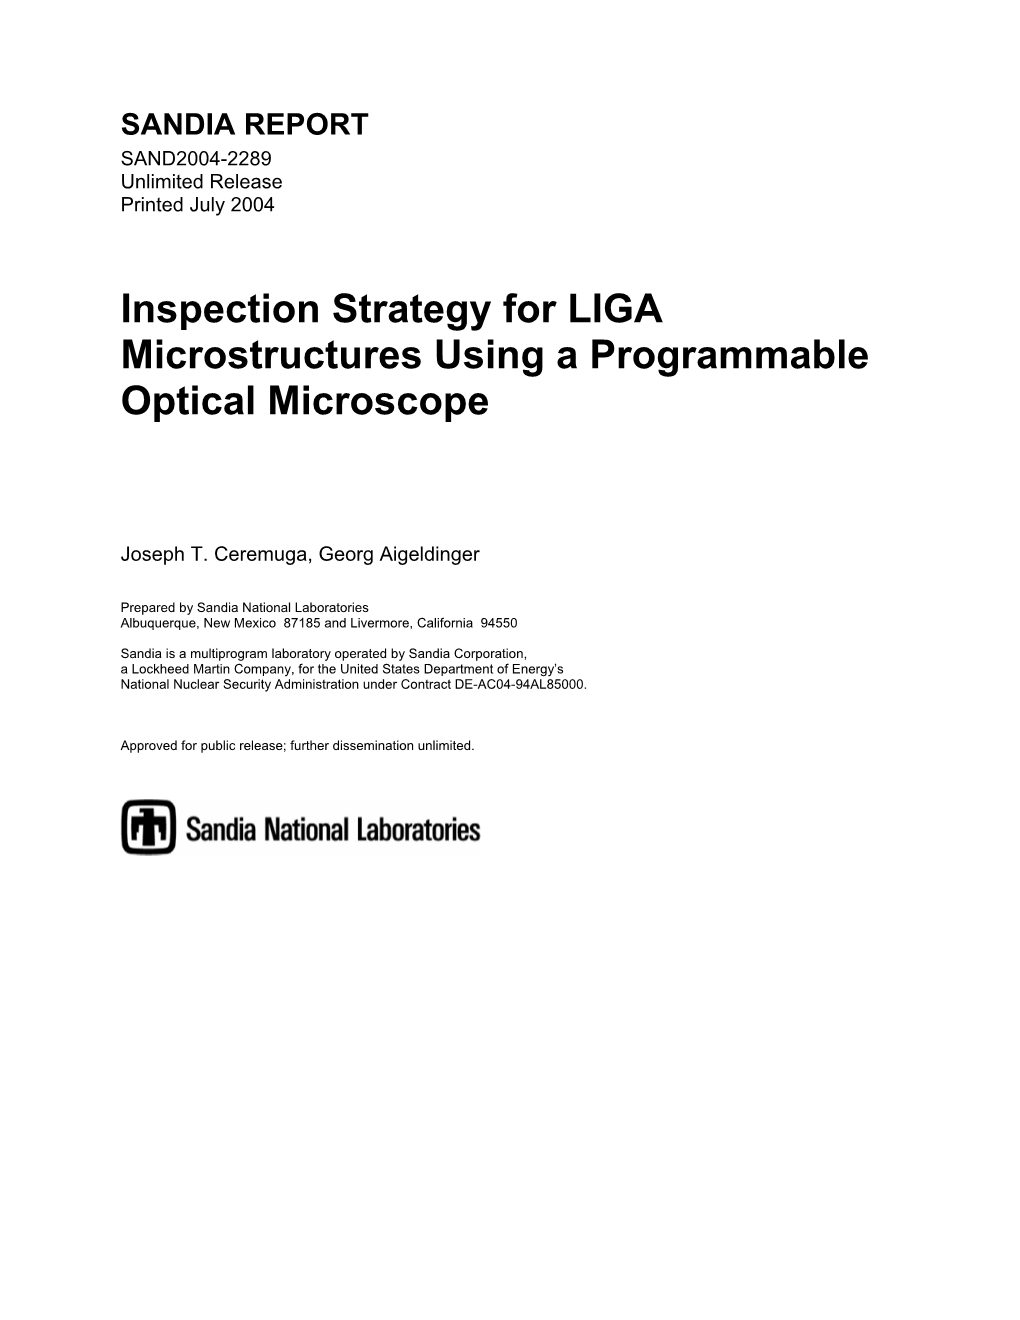 Inspection Strategy for LIGA Microstructures Using a Programmable Optical Microscope